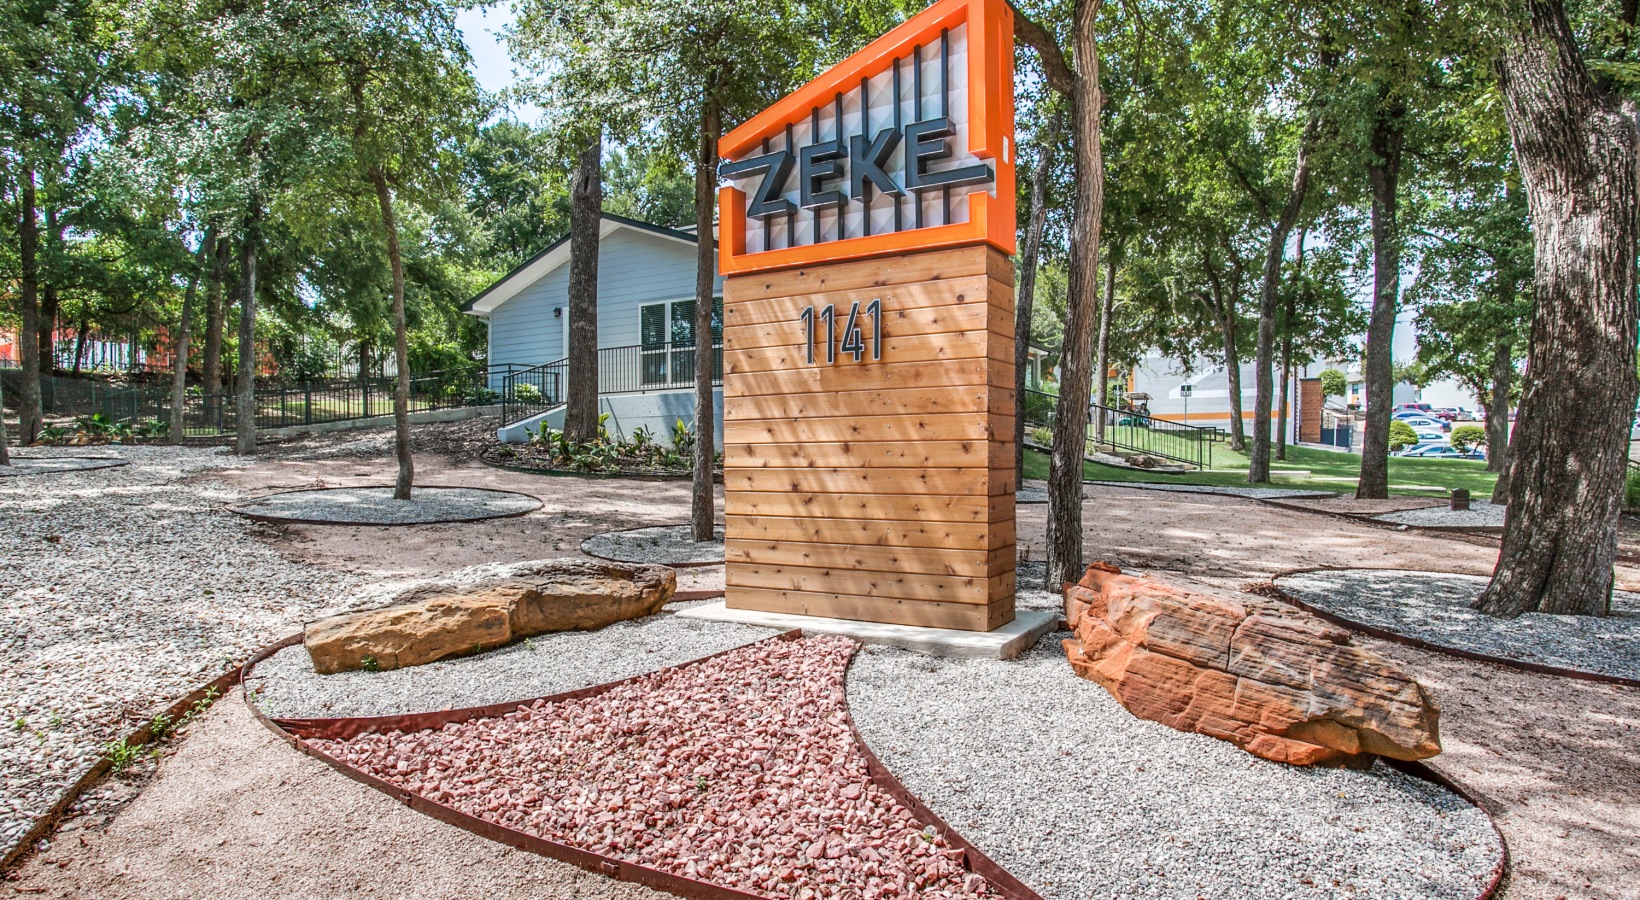 the entrance to the zikle apartment complex in austin, texas at The Zeke